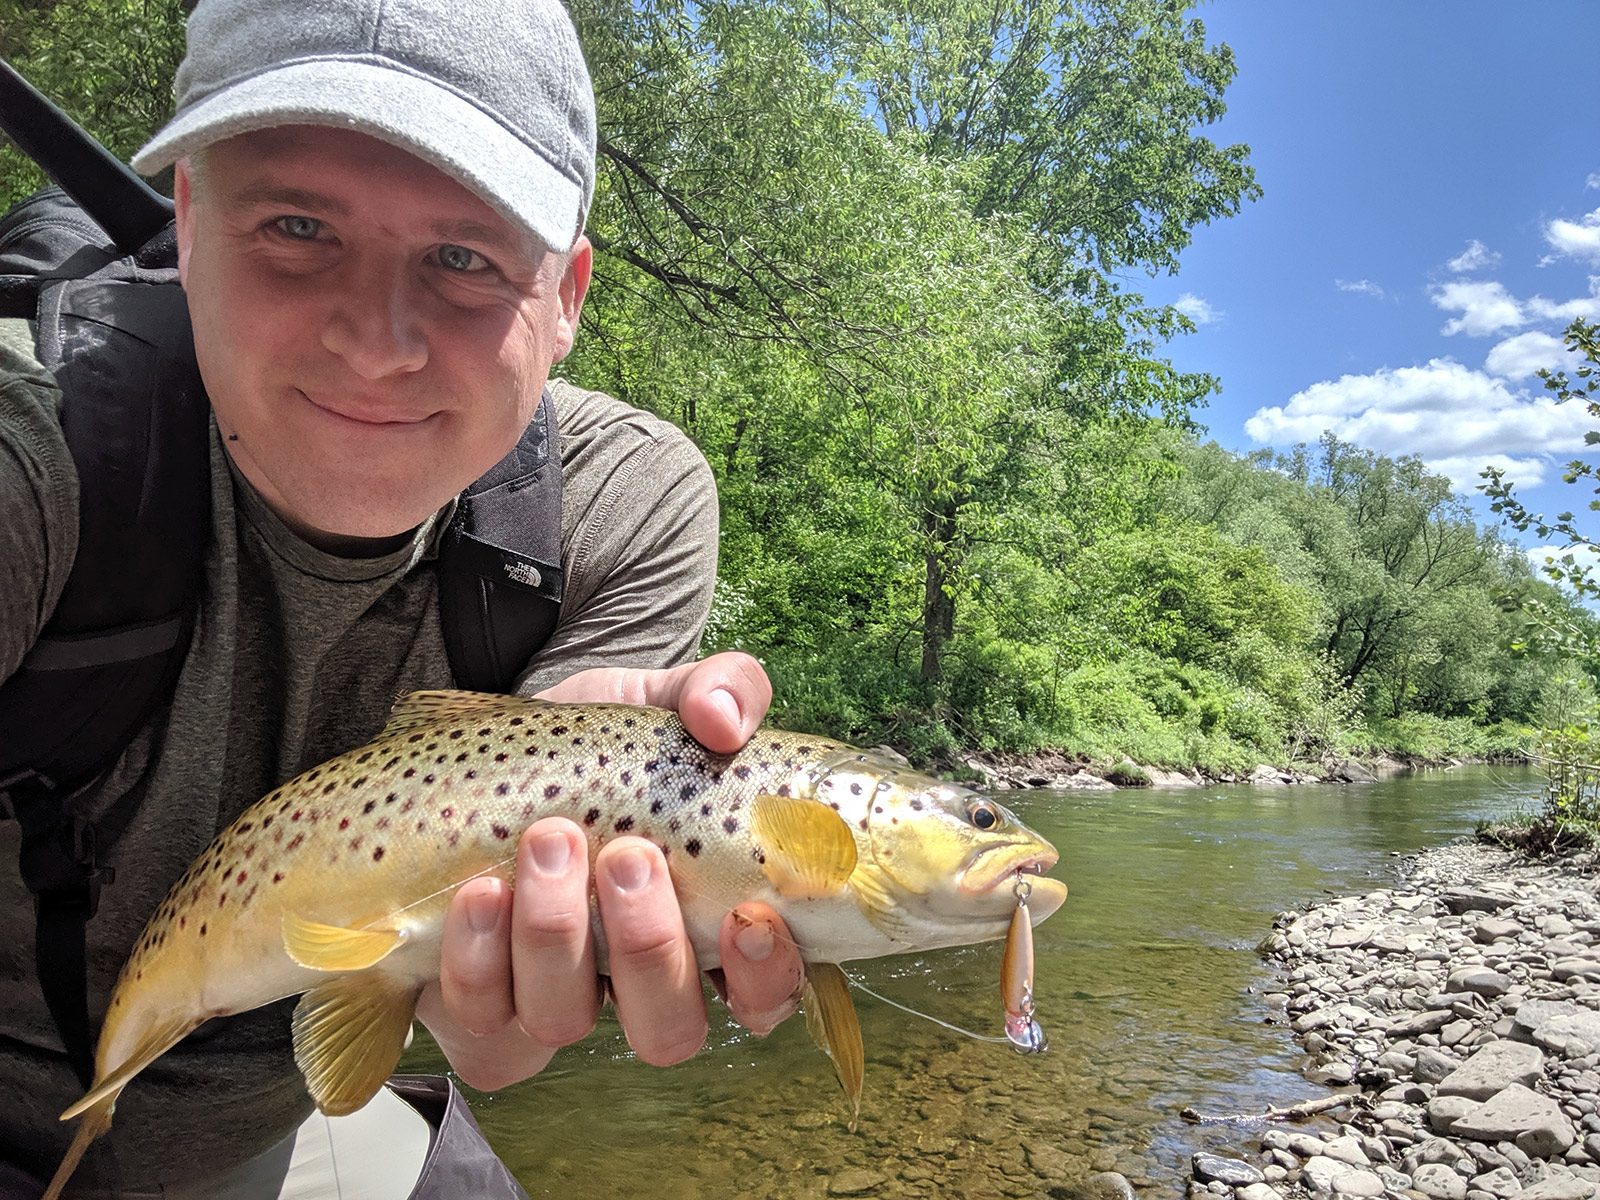 me holding a trout next to a river